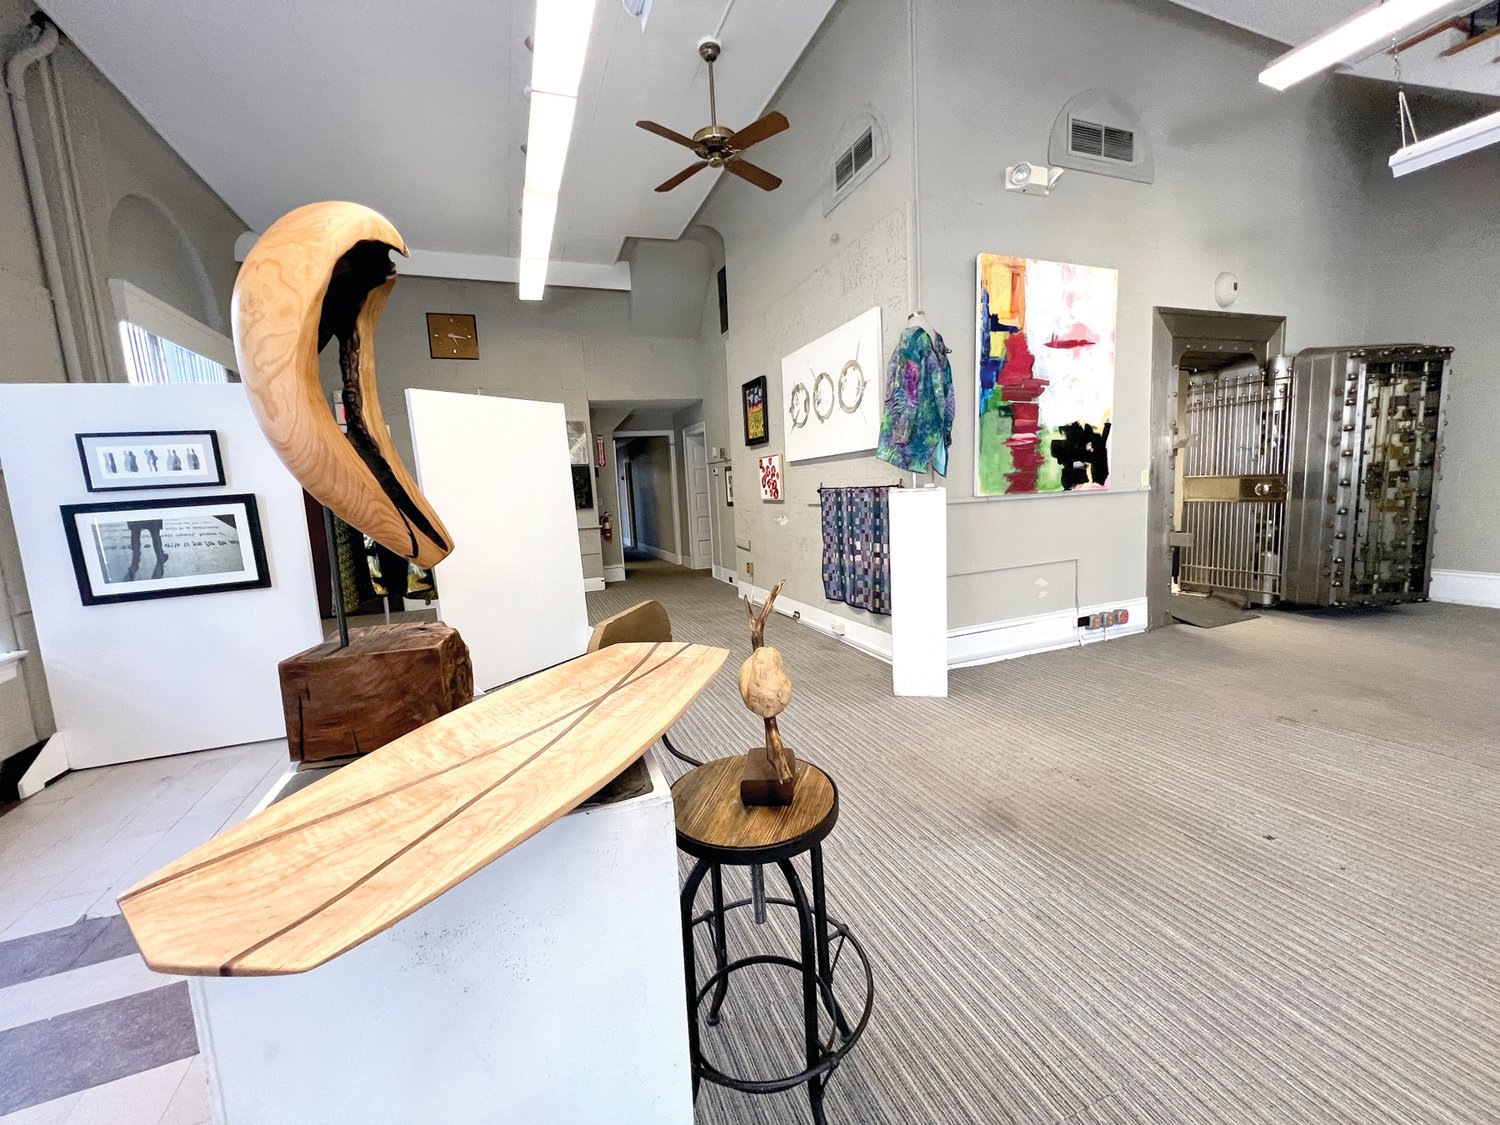 The third annual Juried Art & Artisan Makers Alley Exhibition will be on view in the former Milford Bank in Milford, N.J.